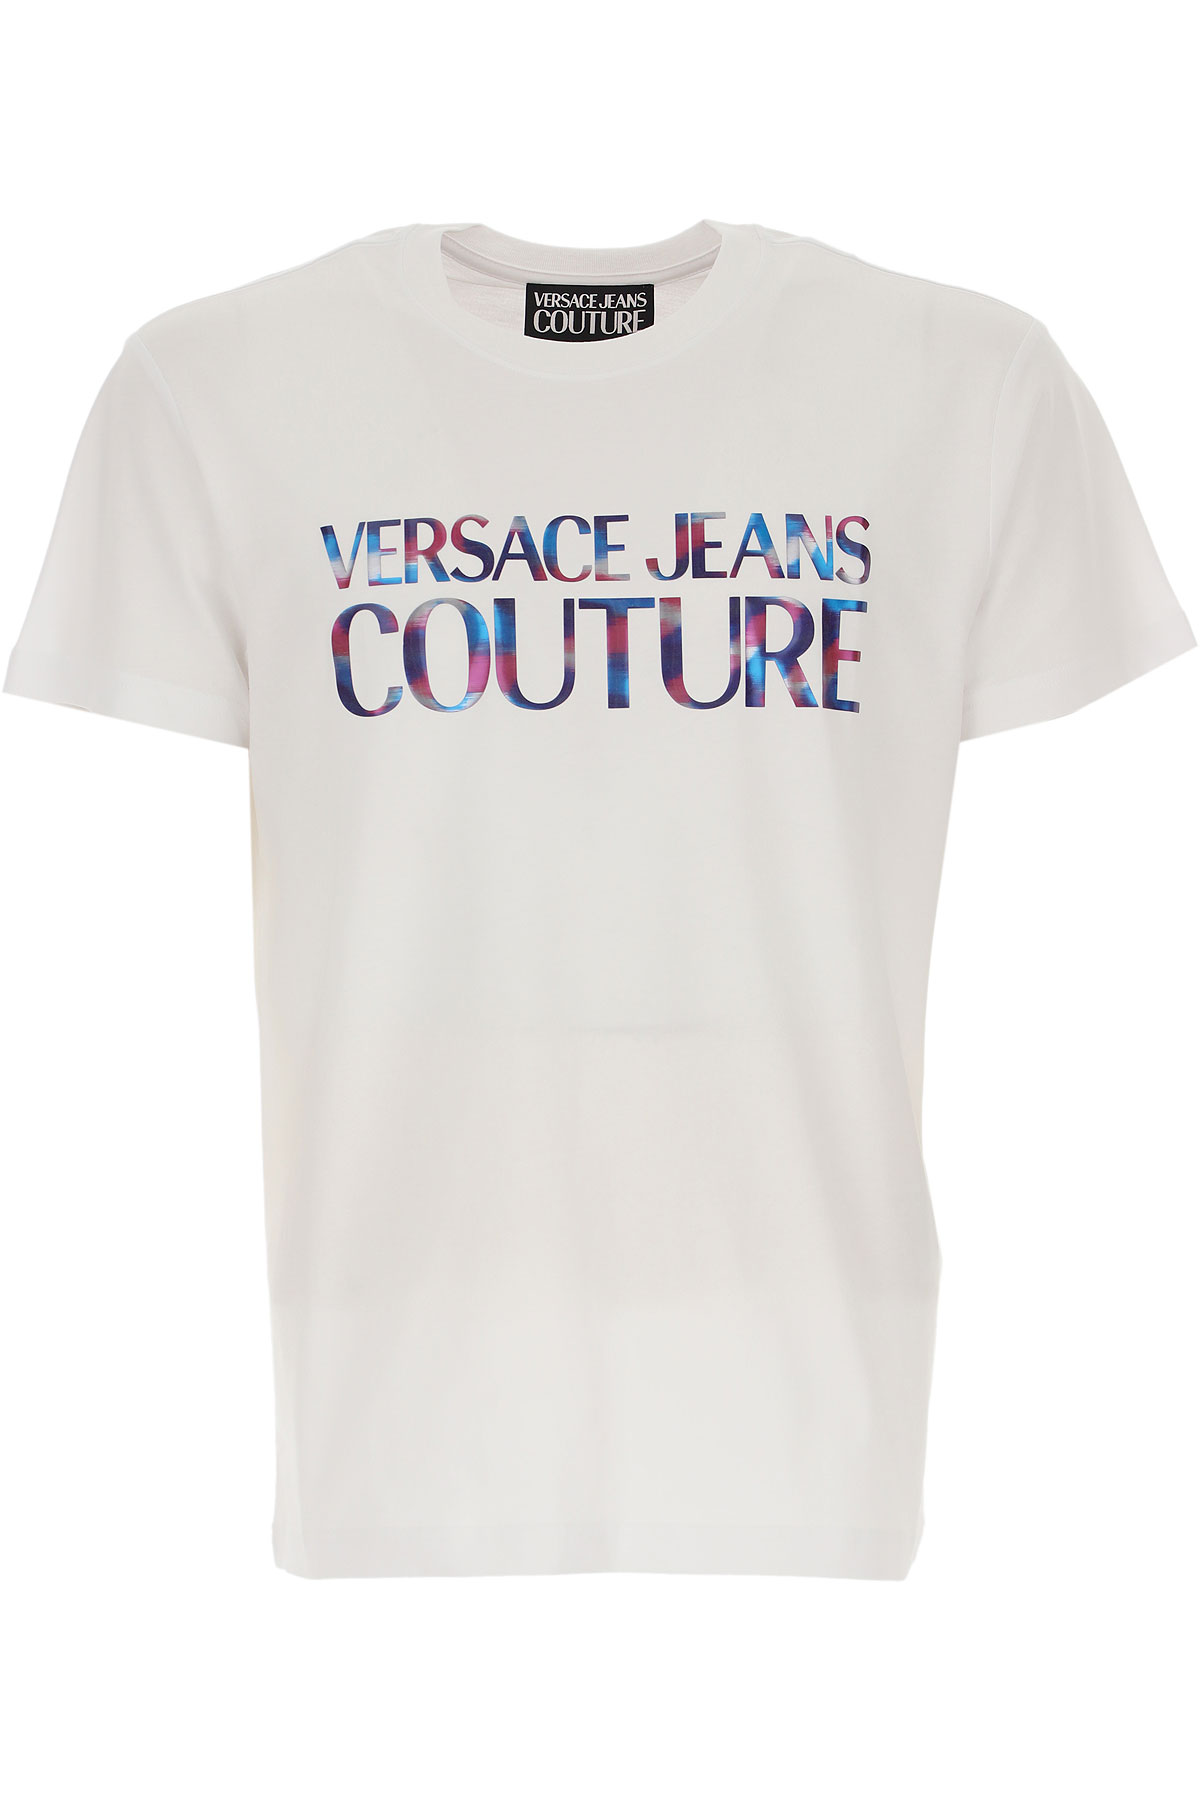 Mens Clothing Versace Jeans Couture , Style code: b3gwa7gb-30382-003